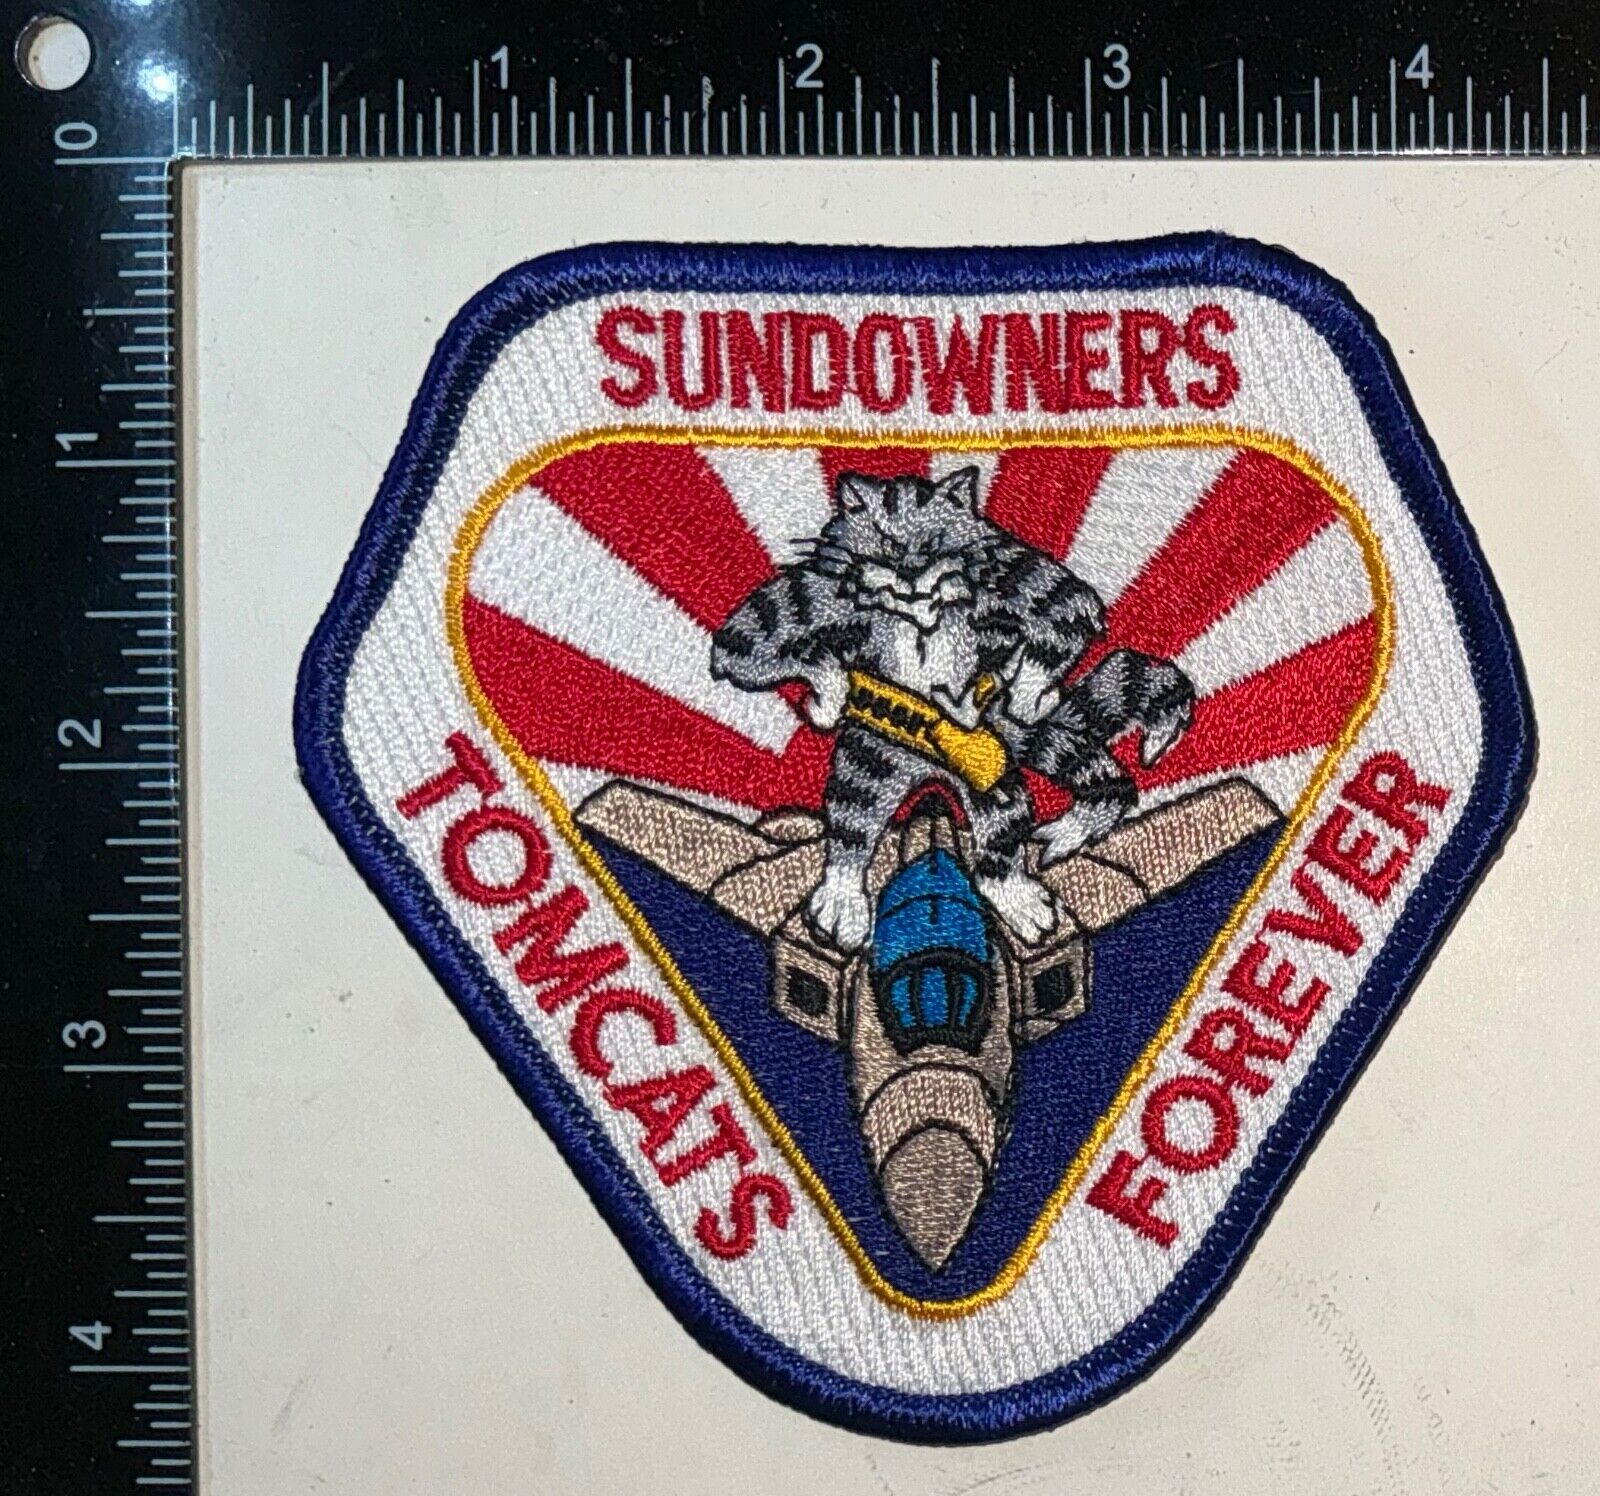 USN US Navy VF-111 Sundowners F-4 Tomcats Forever Patch